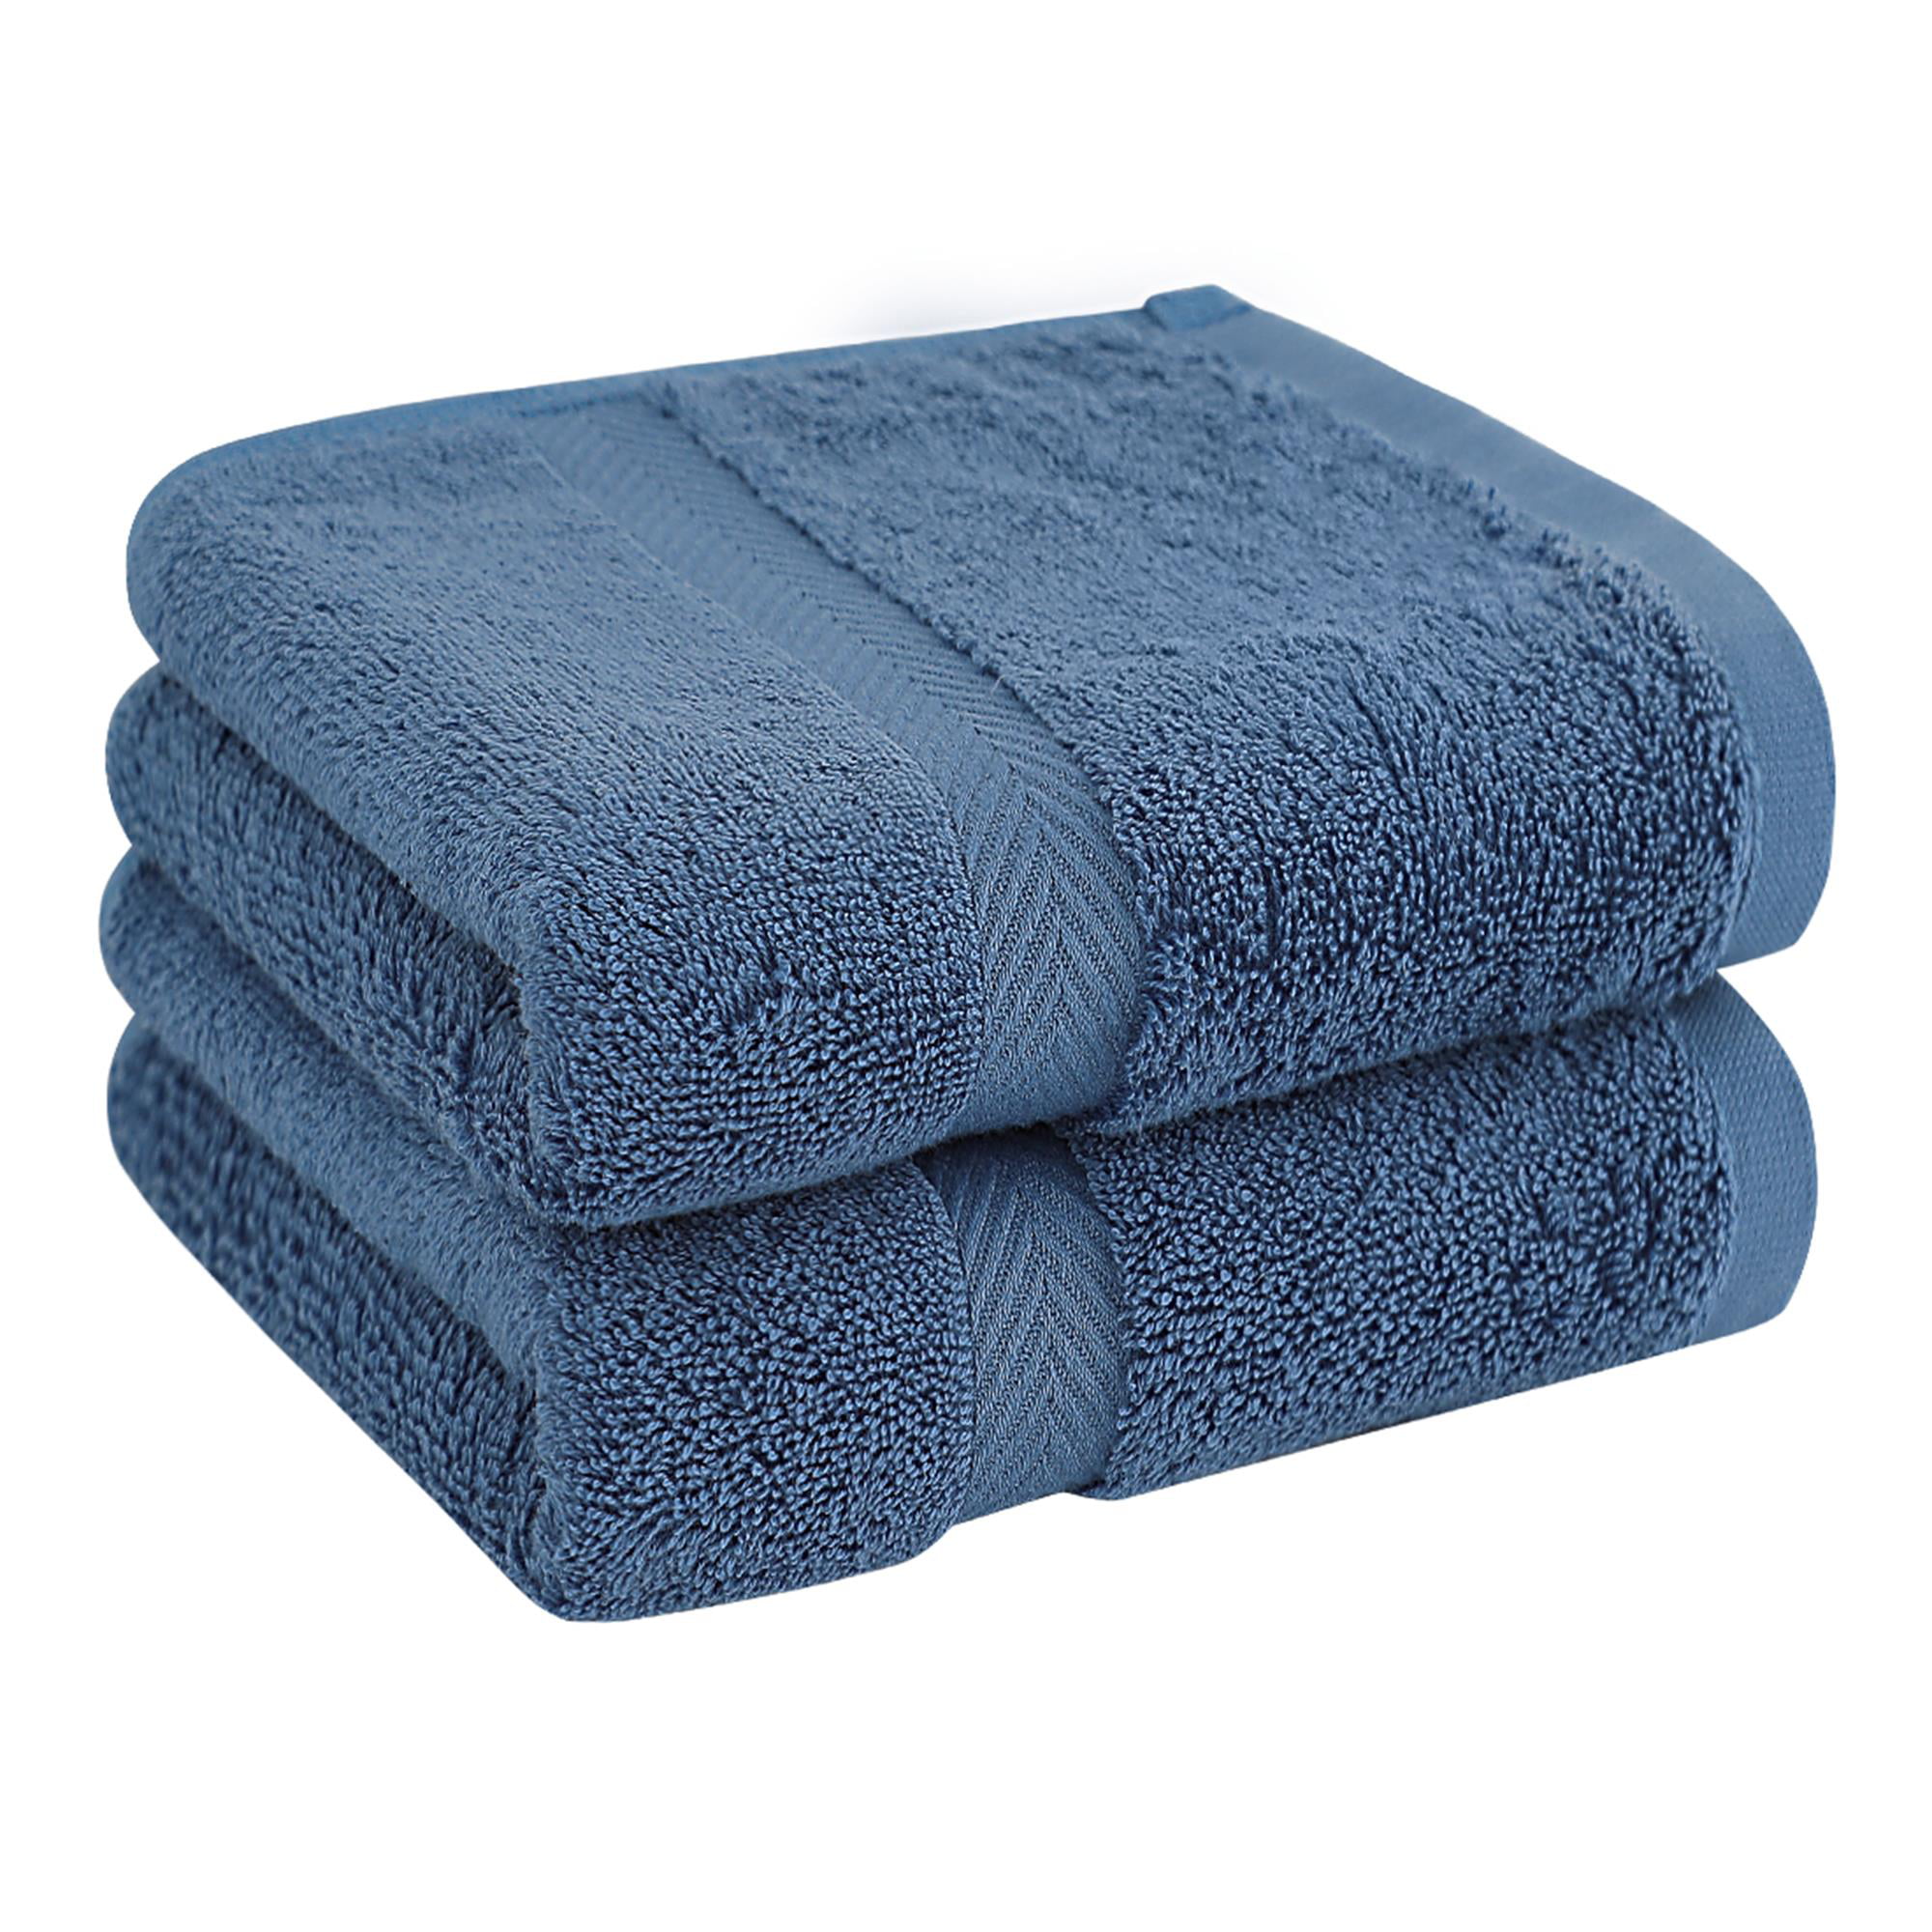 750 GSM 100% Egyptian Cotton Hotel Quality Hand Towels Super Soft Thick Luxury 